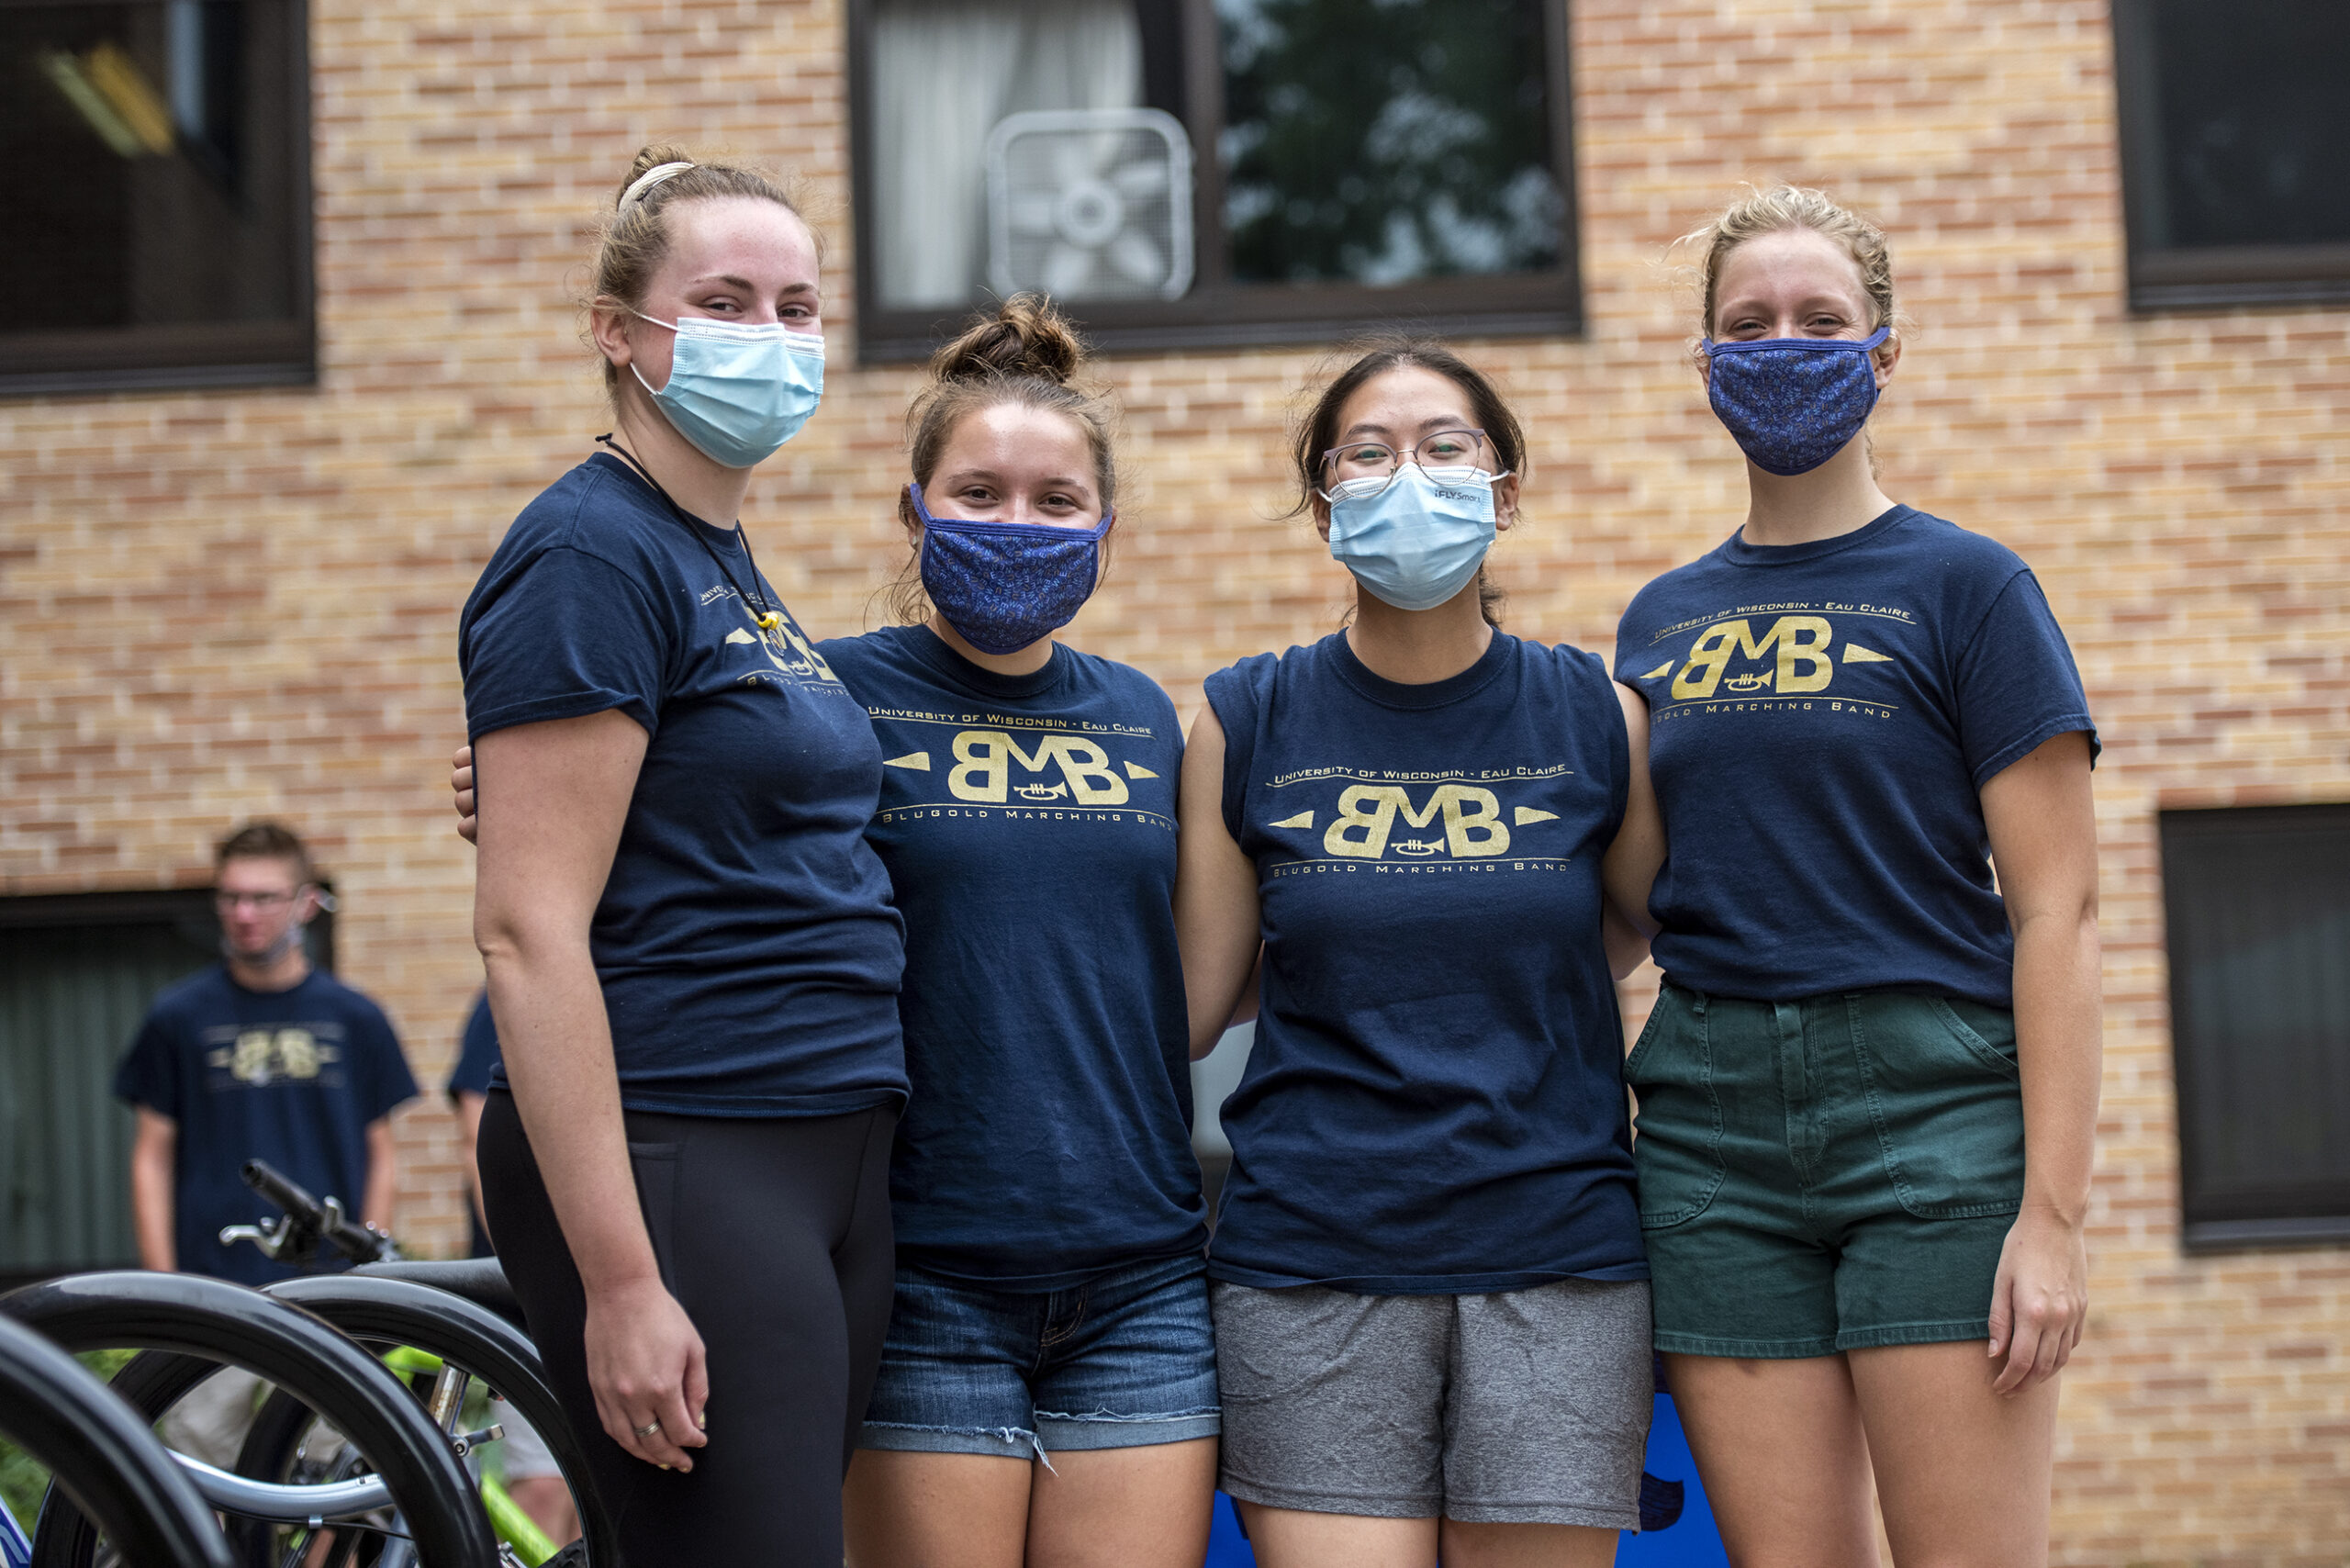 Four girls wear face masks as they stand together.